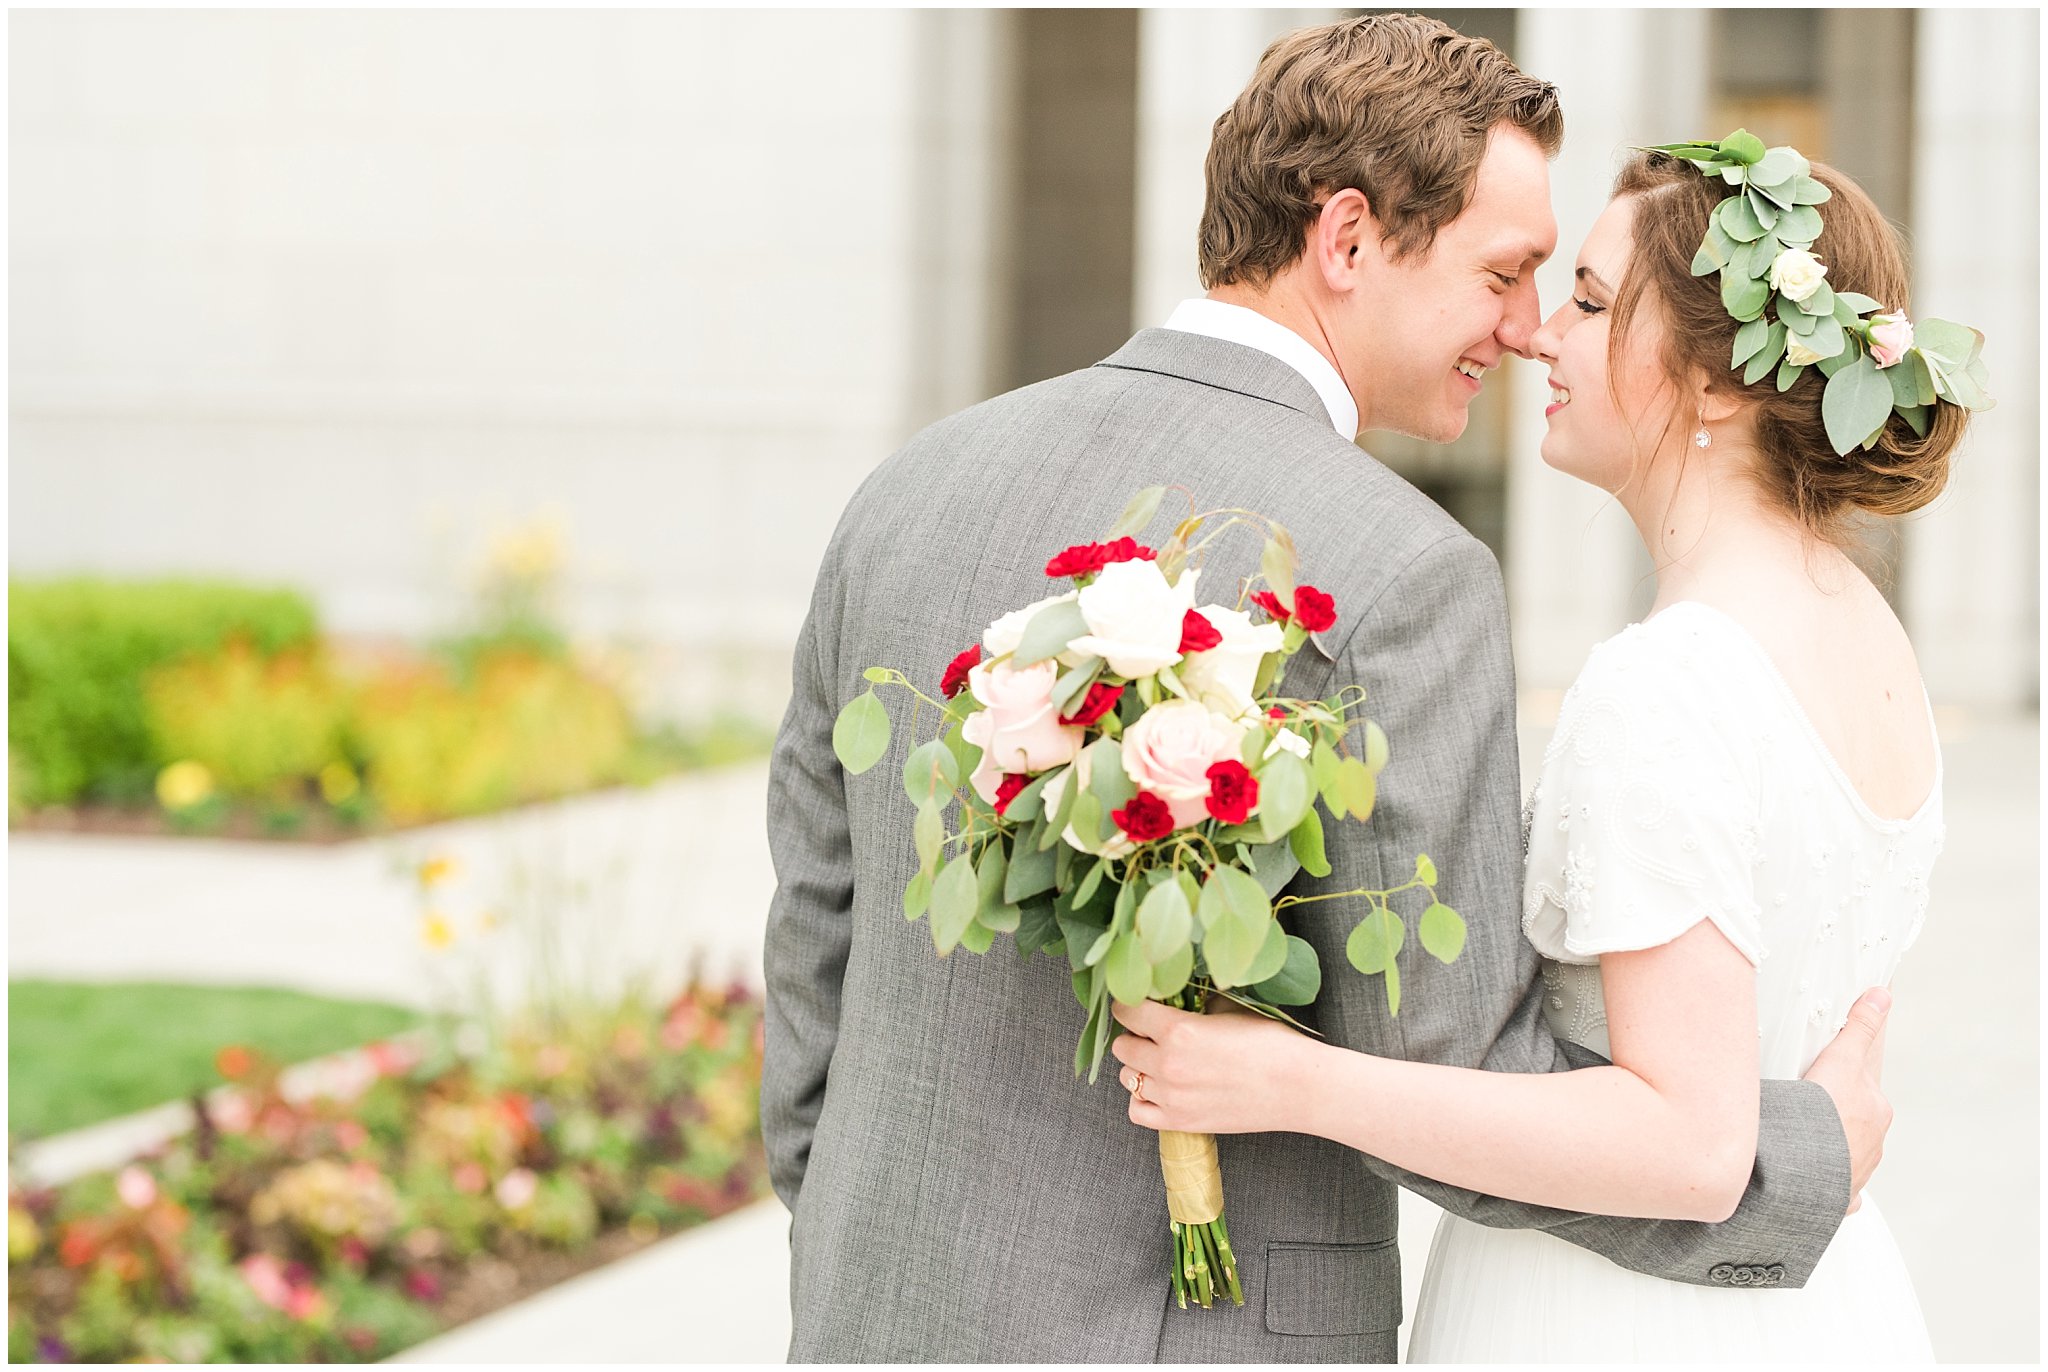 Bride in flower crown and groom in grey suit with maroon tie | Grey, gold, and maroon wedding colors | Draper Temple Spring Formal Session | Jessie and Dallin Photography